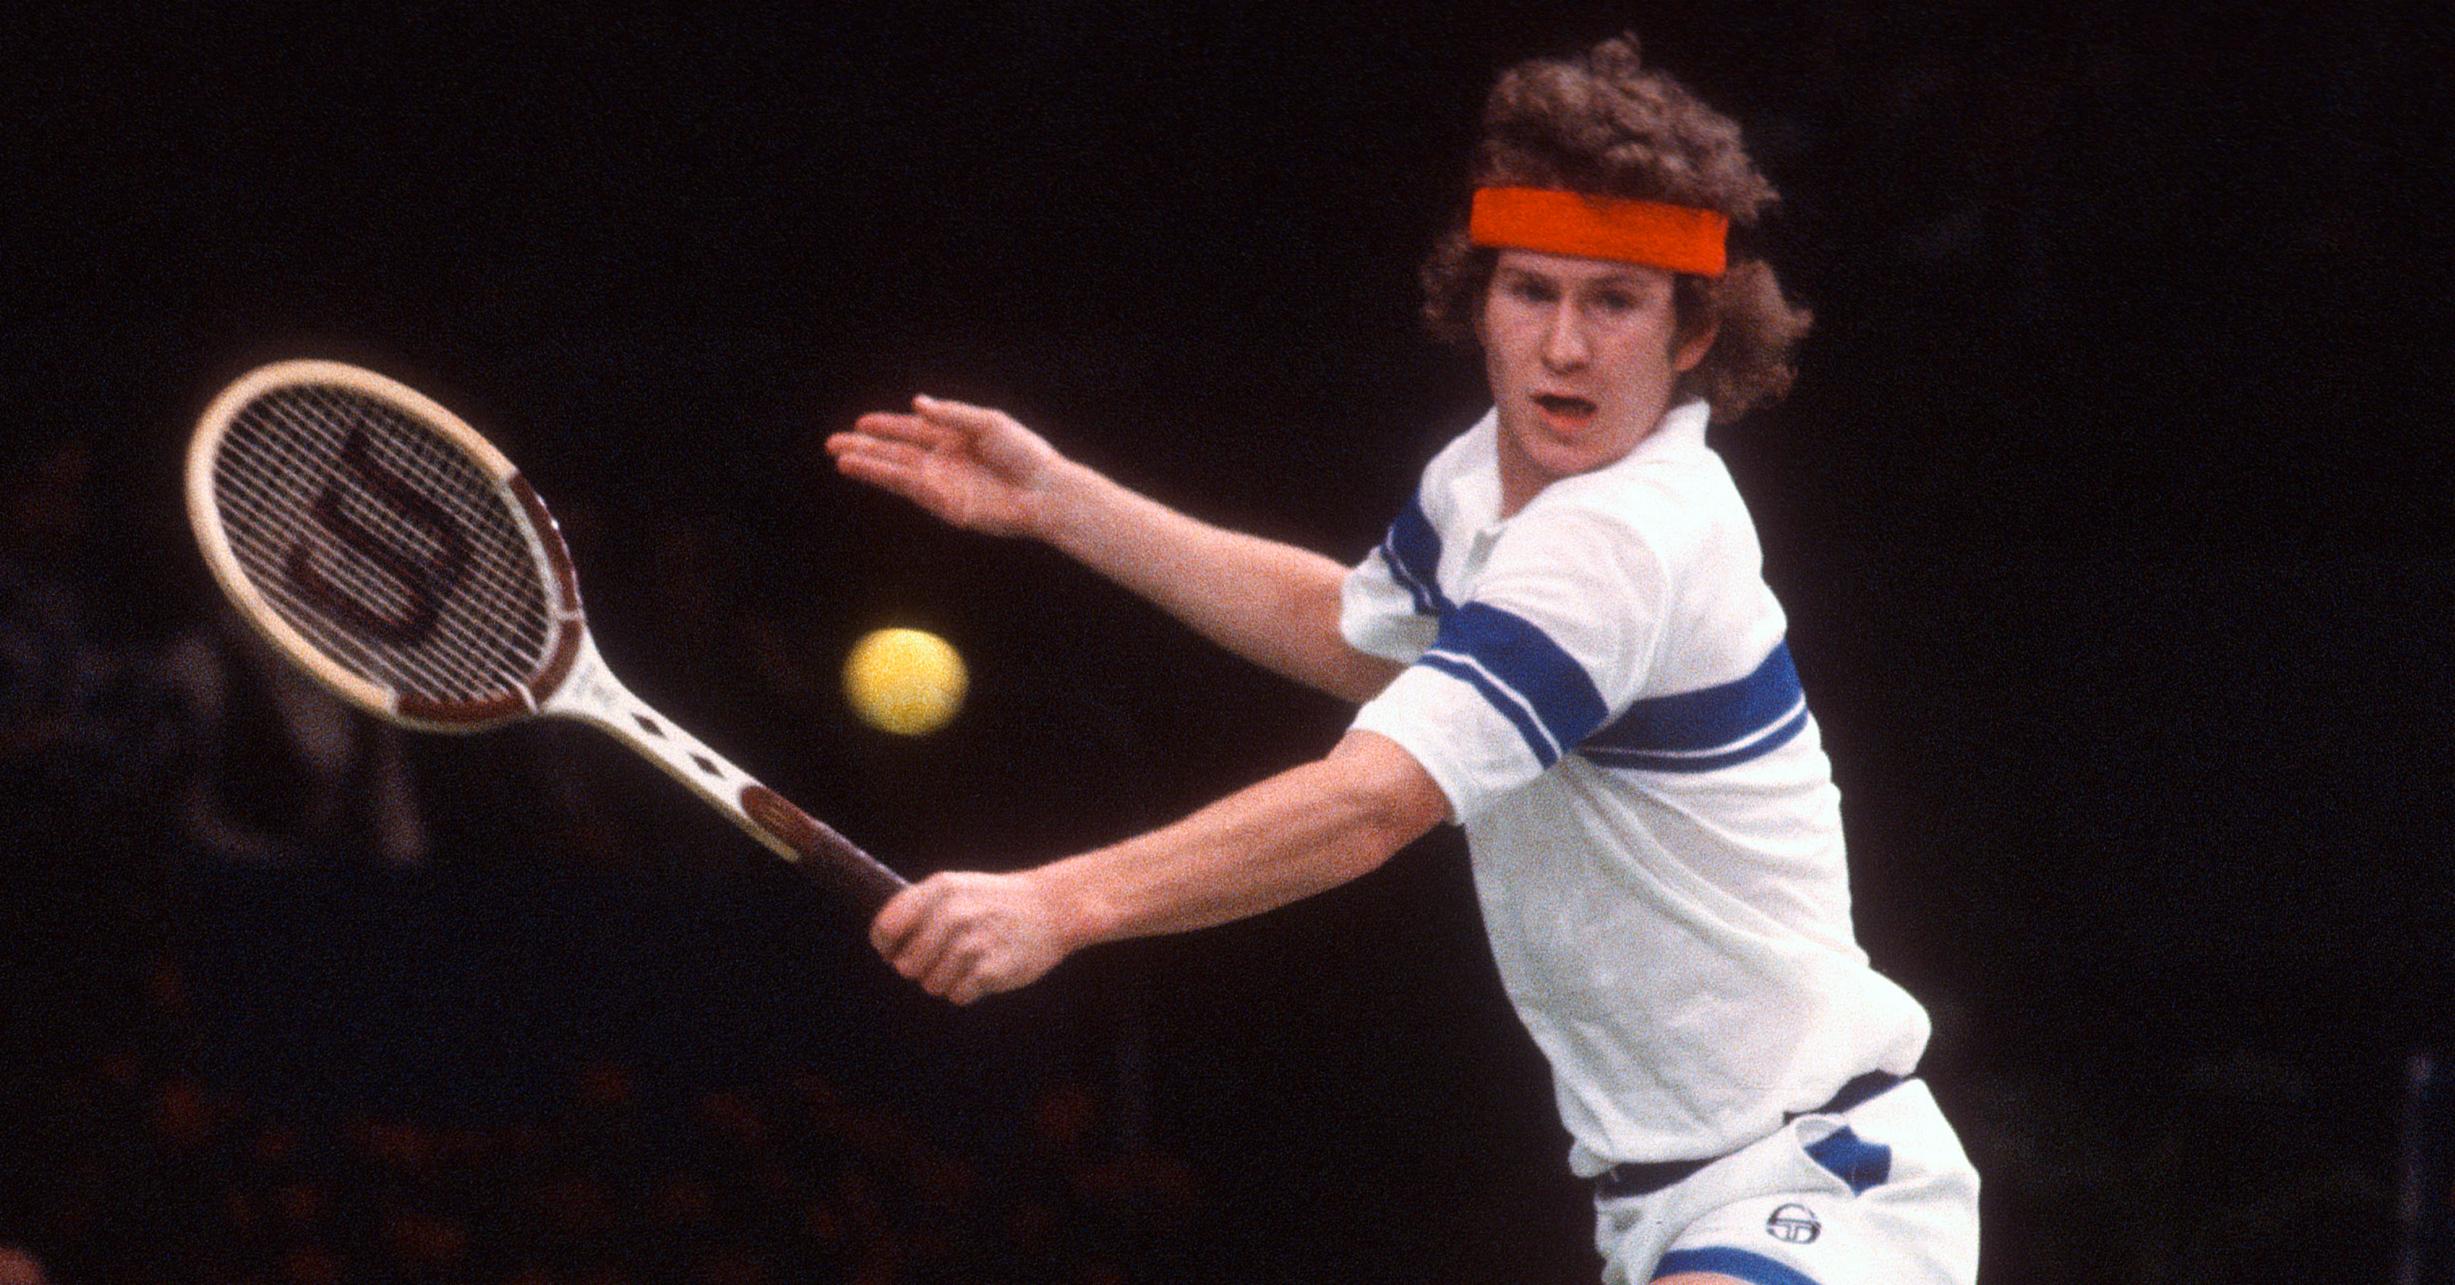 RANCHO MIRAGE, CA - CIRCA 1978: John McEnroe of the United States hits a return during a match in the 1978 Davis Cup finals December 10, 1978 at the Mission Hills Country Club in Rancho Mirage, California.